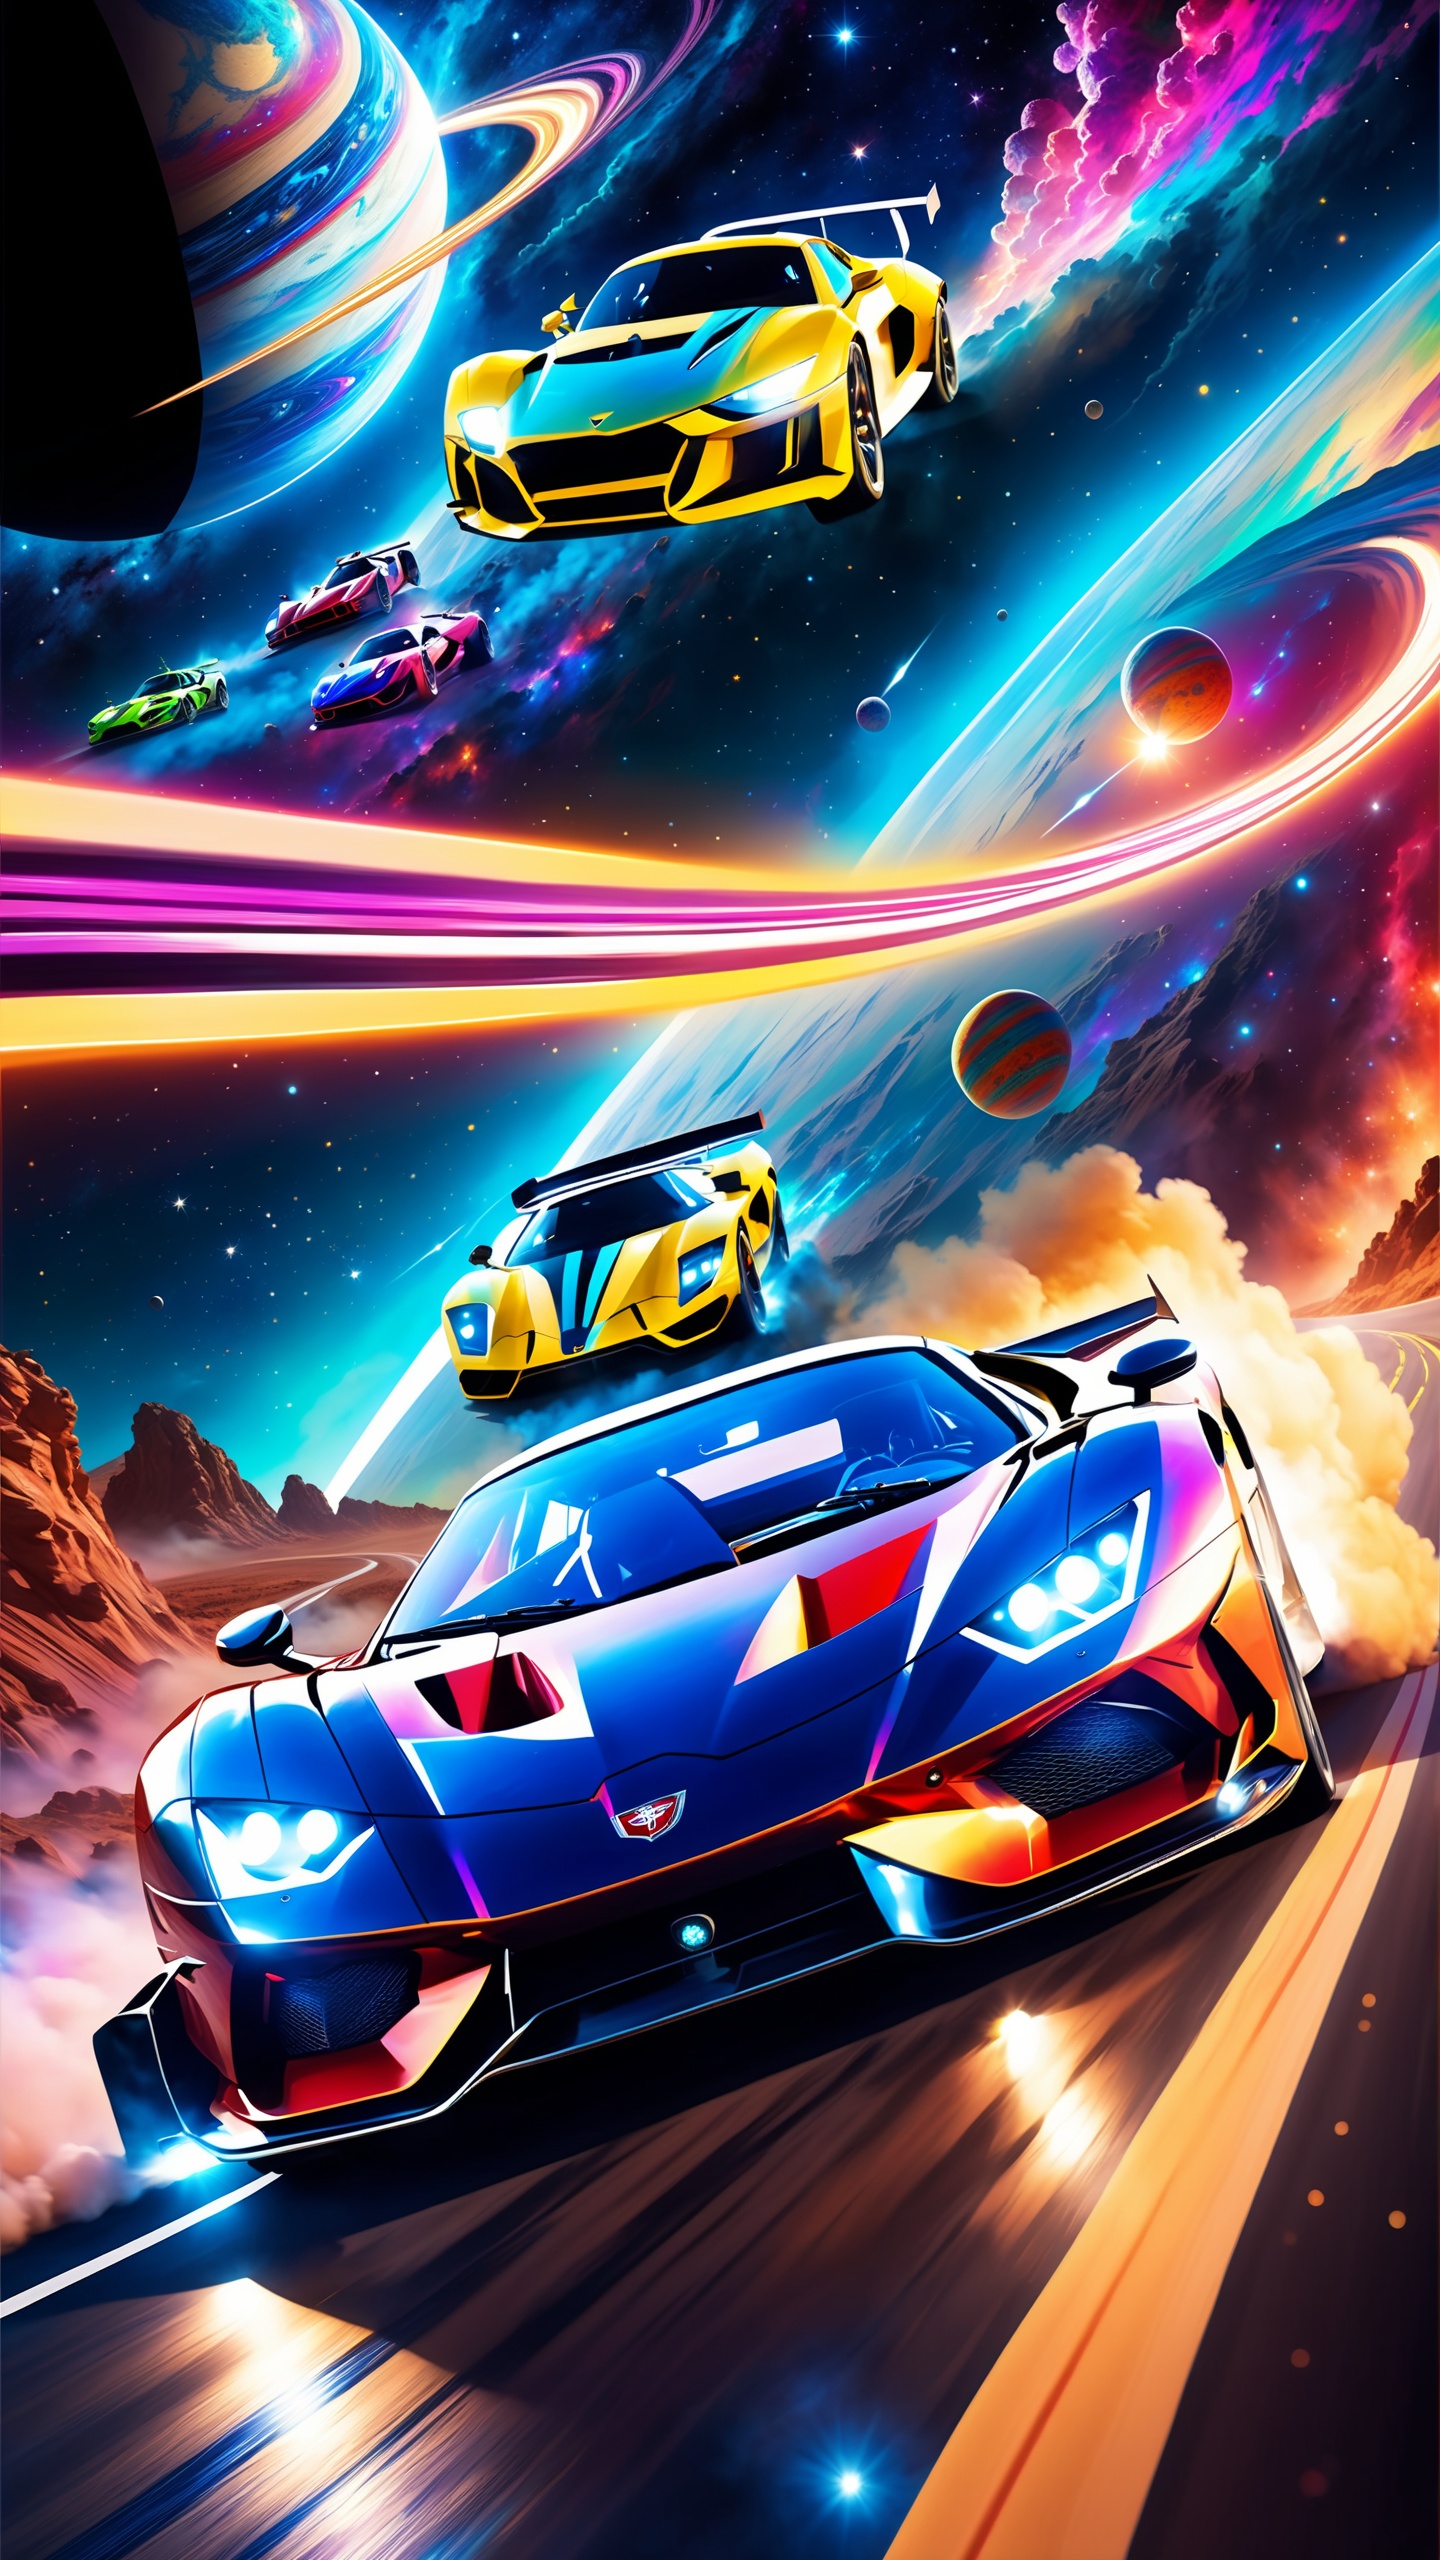 (masterpiece, best quality), high resolution, (8k resolution), (ultra detailed), The picture shows a car trail suspended in the starry sky, Two racing cars racing towards the camera, Super sports car, Plasma engine, Colorful planets and nebulae in the background, hyper realistic, more details, low saturation, realism, photorealistic